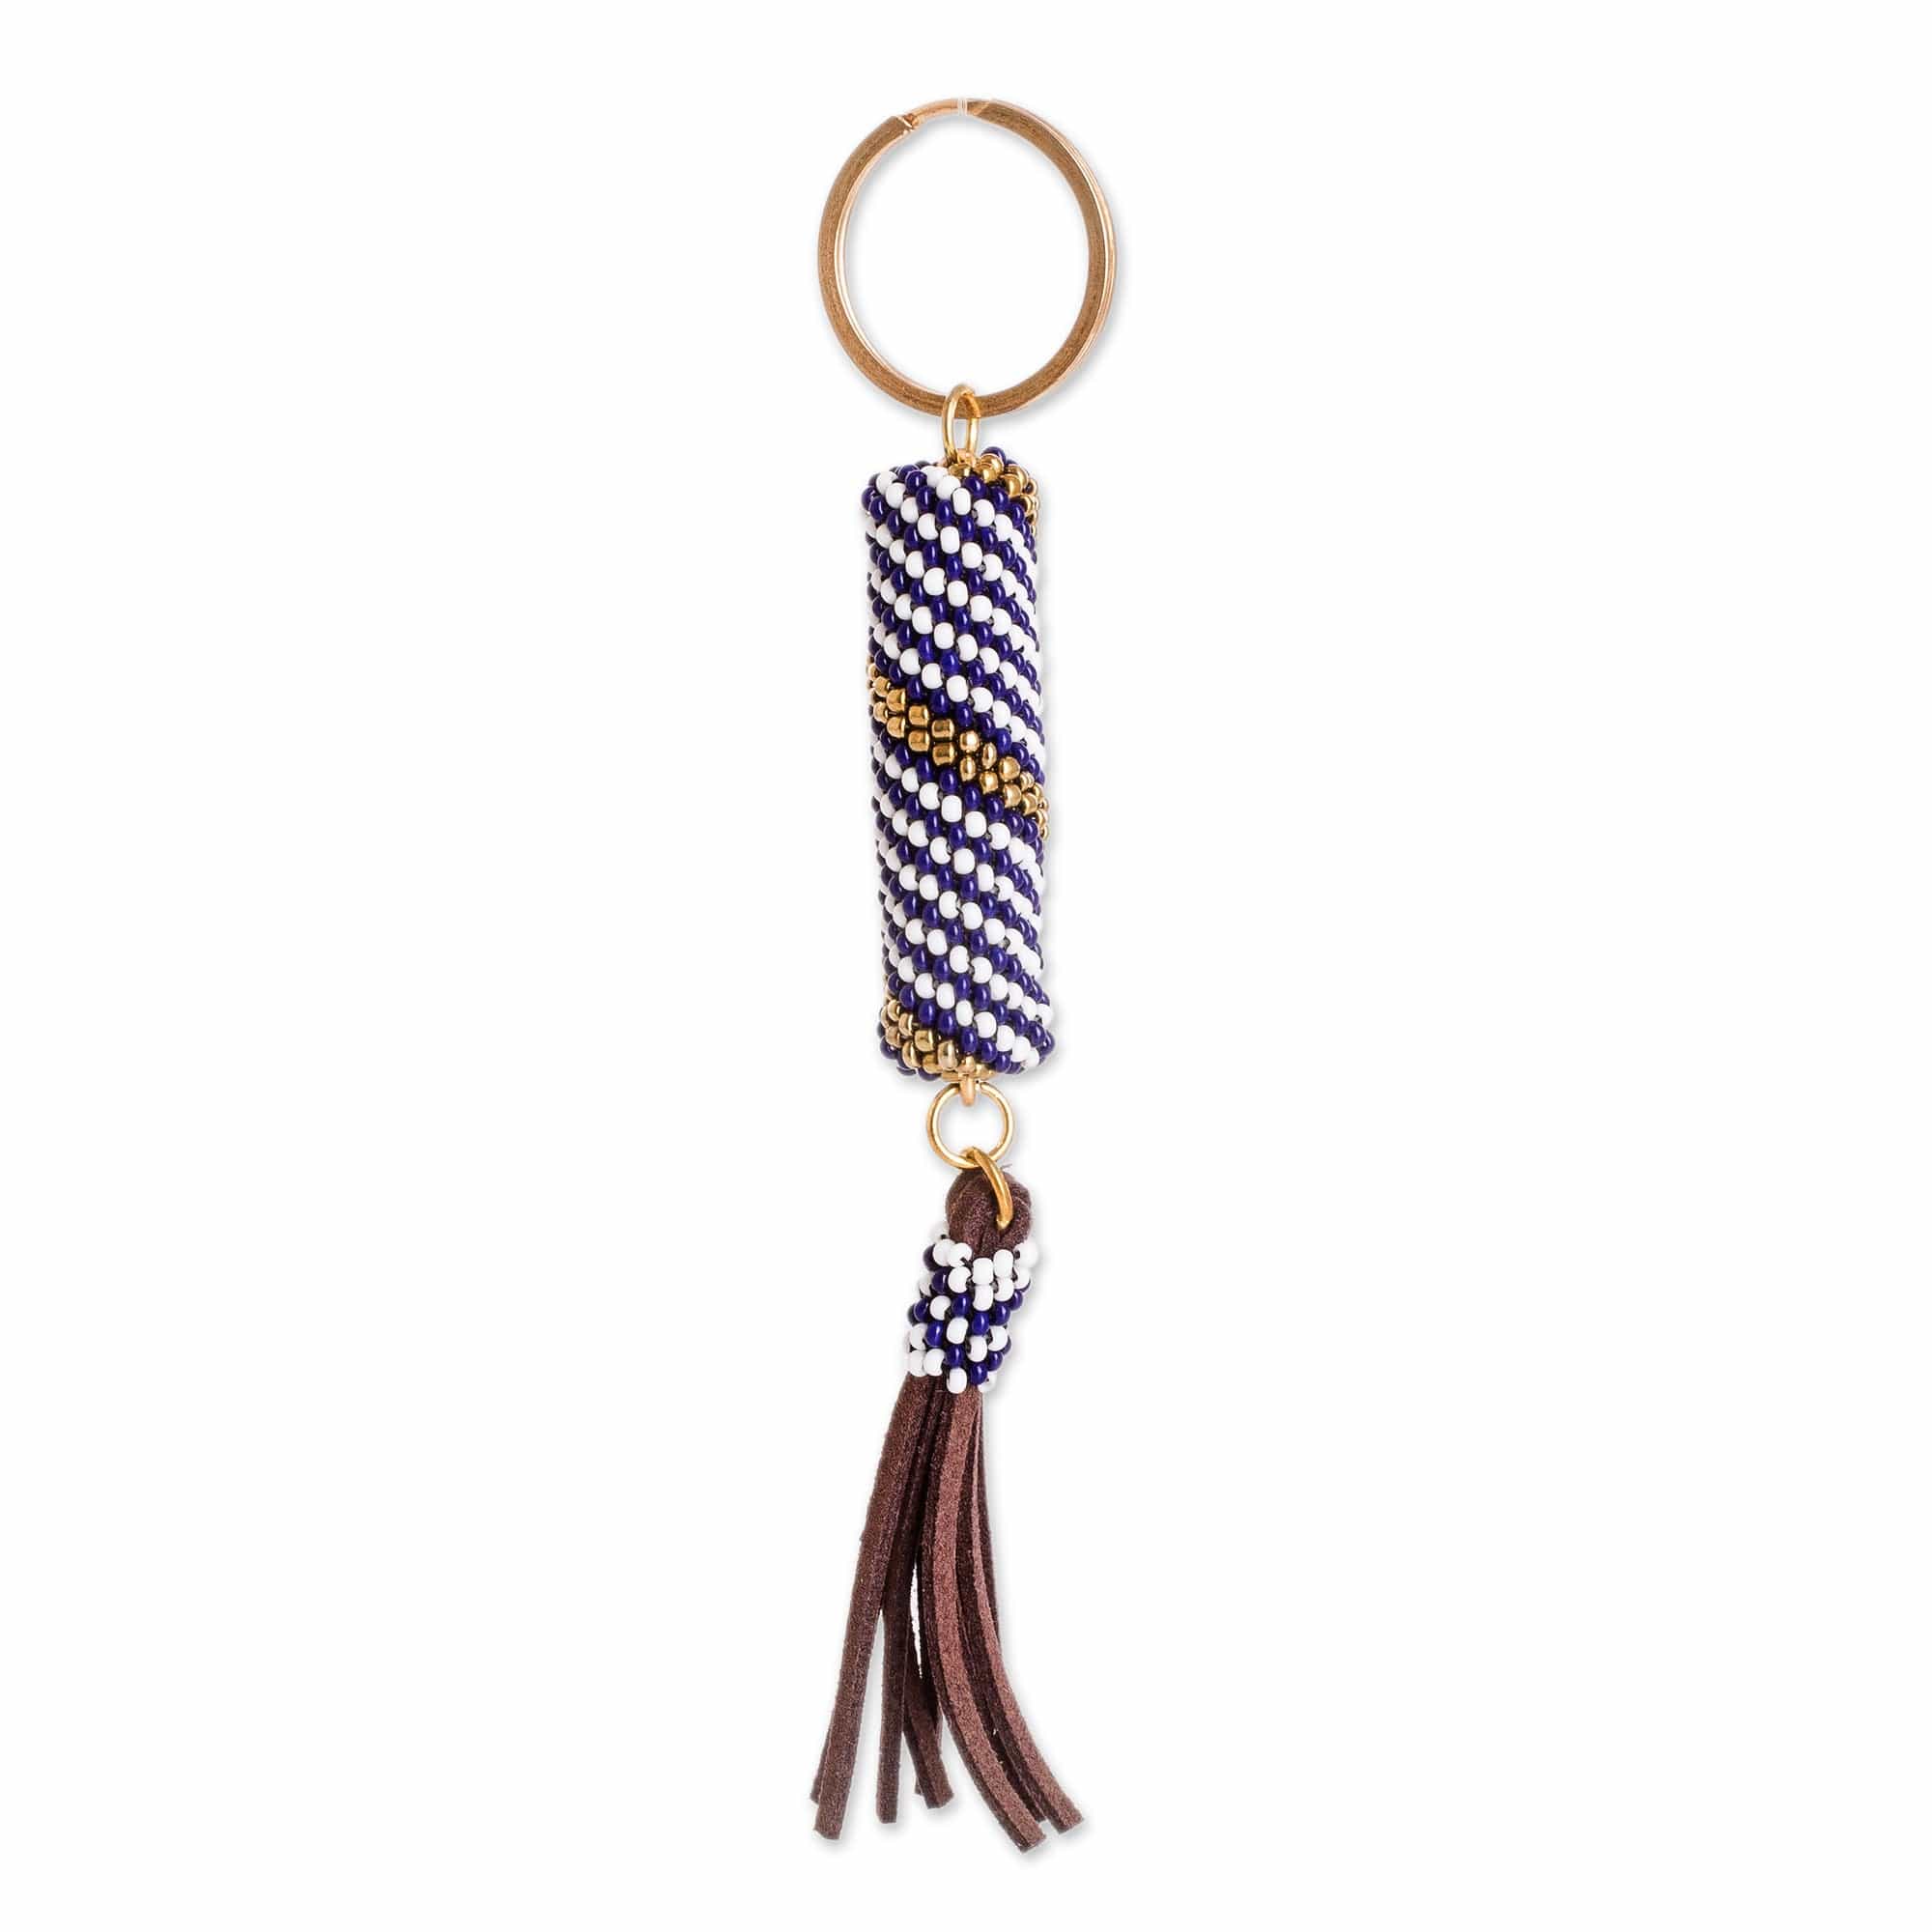 Cinta Key Fob  Handwoven Leather Keychain Made in Guatemala by